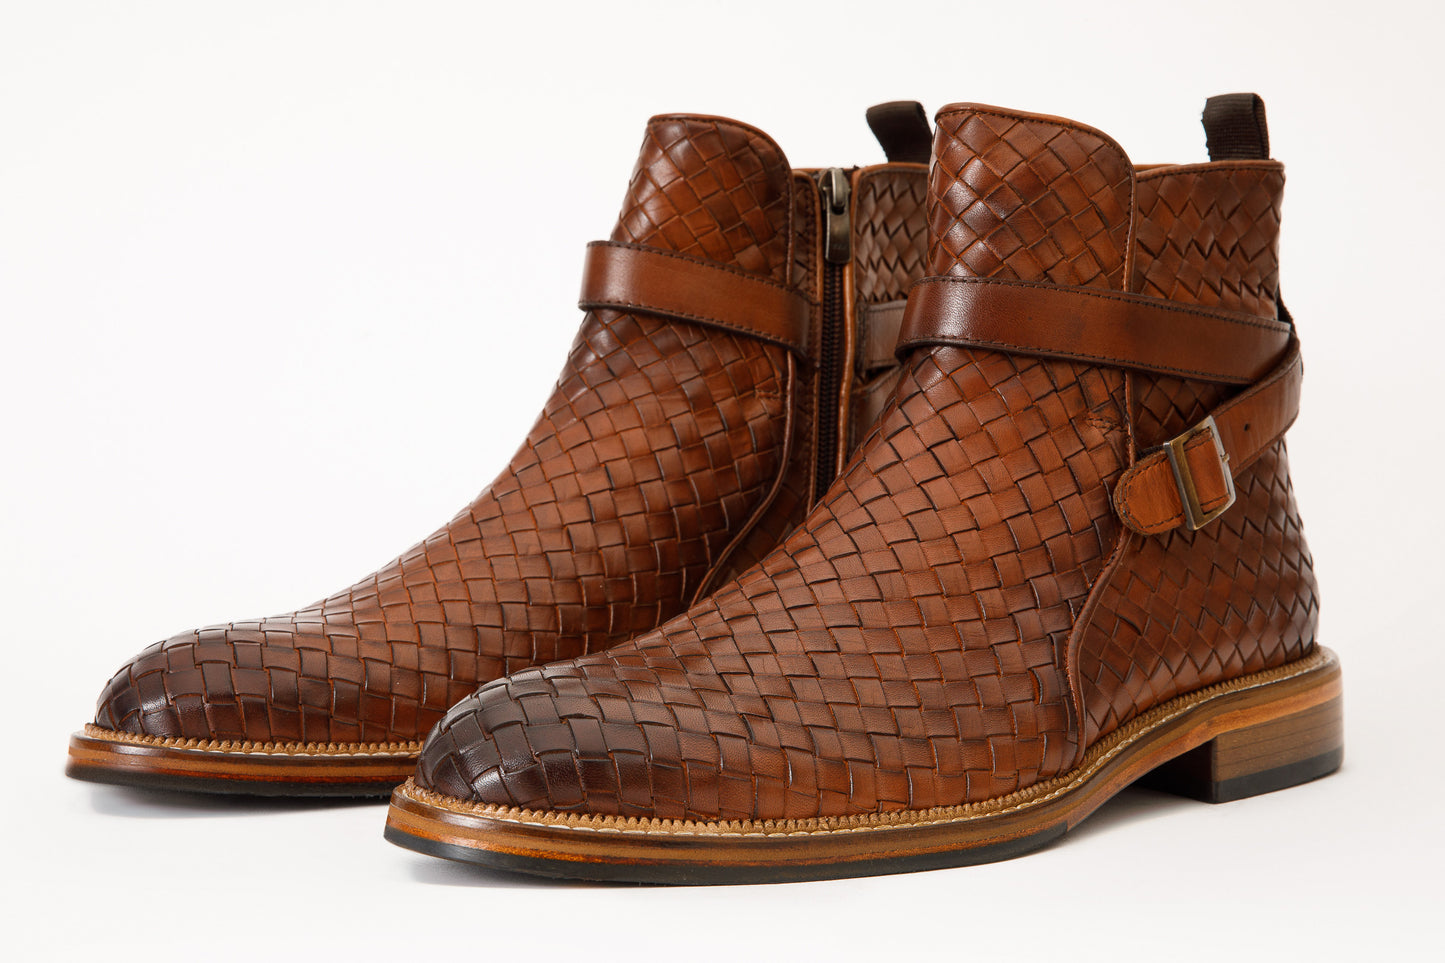 The Morral Tan Handwoven Leather Cross Strap Buckle Zip-Up Men Boot